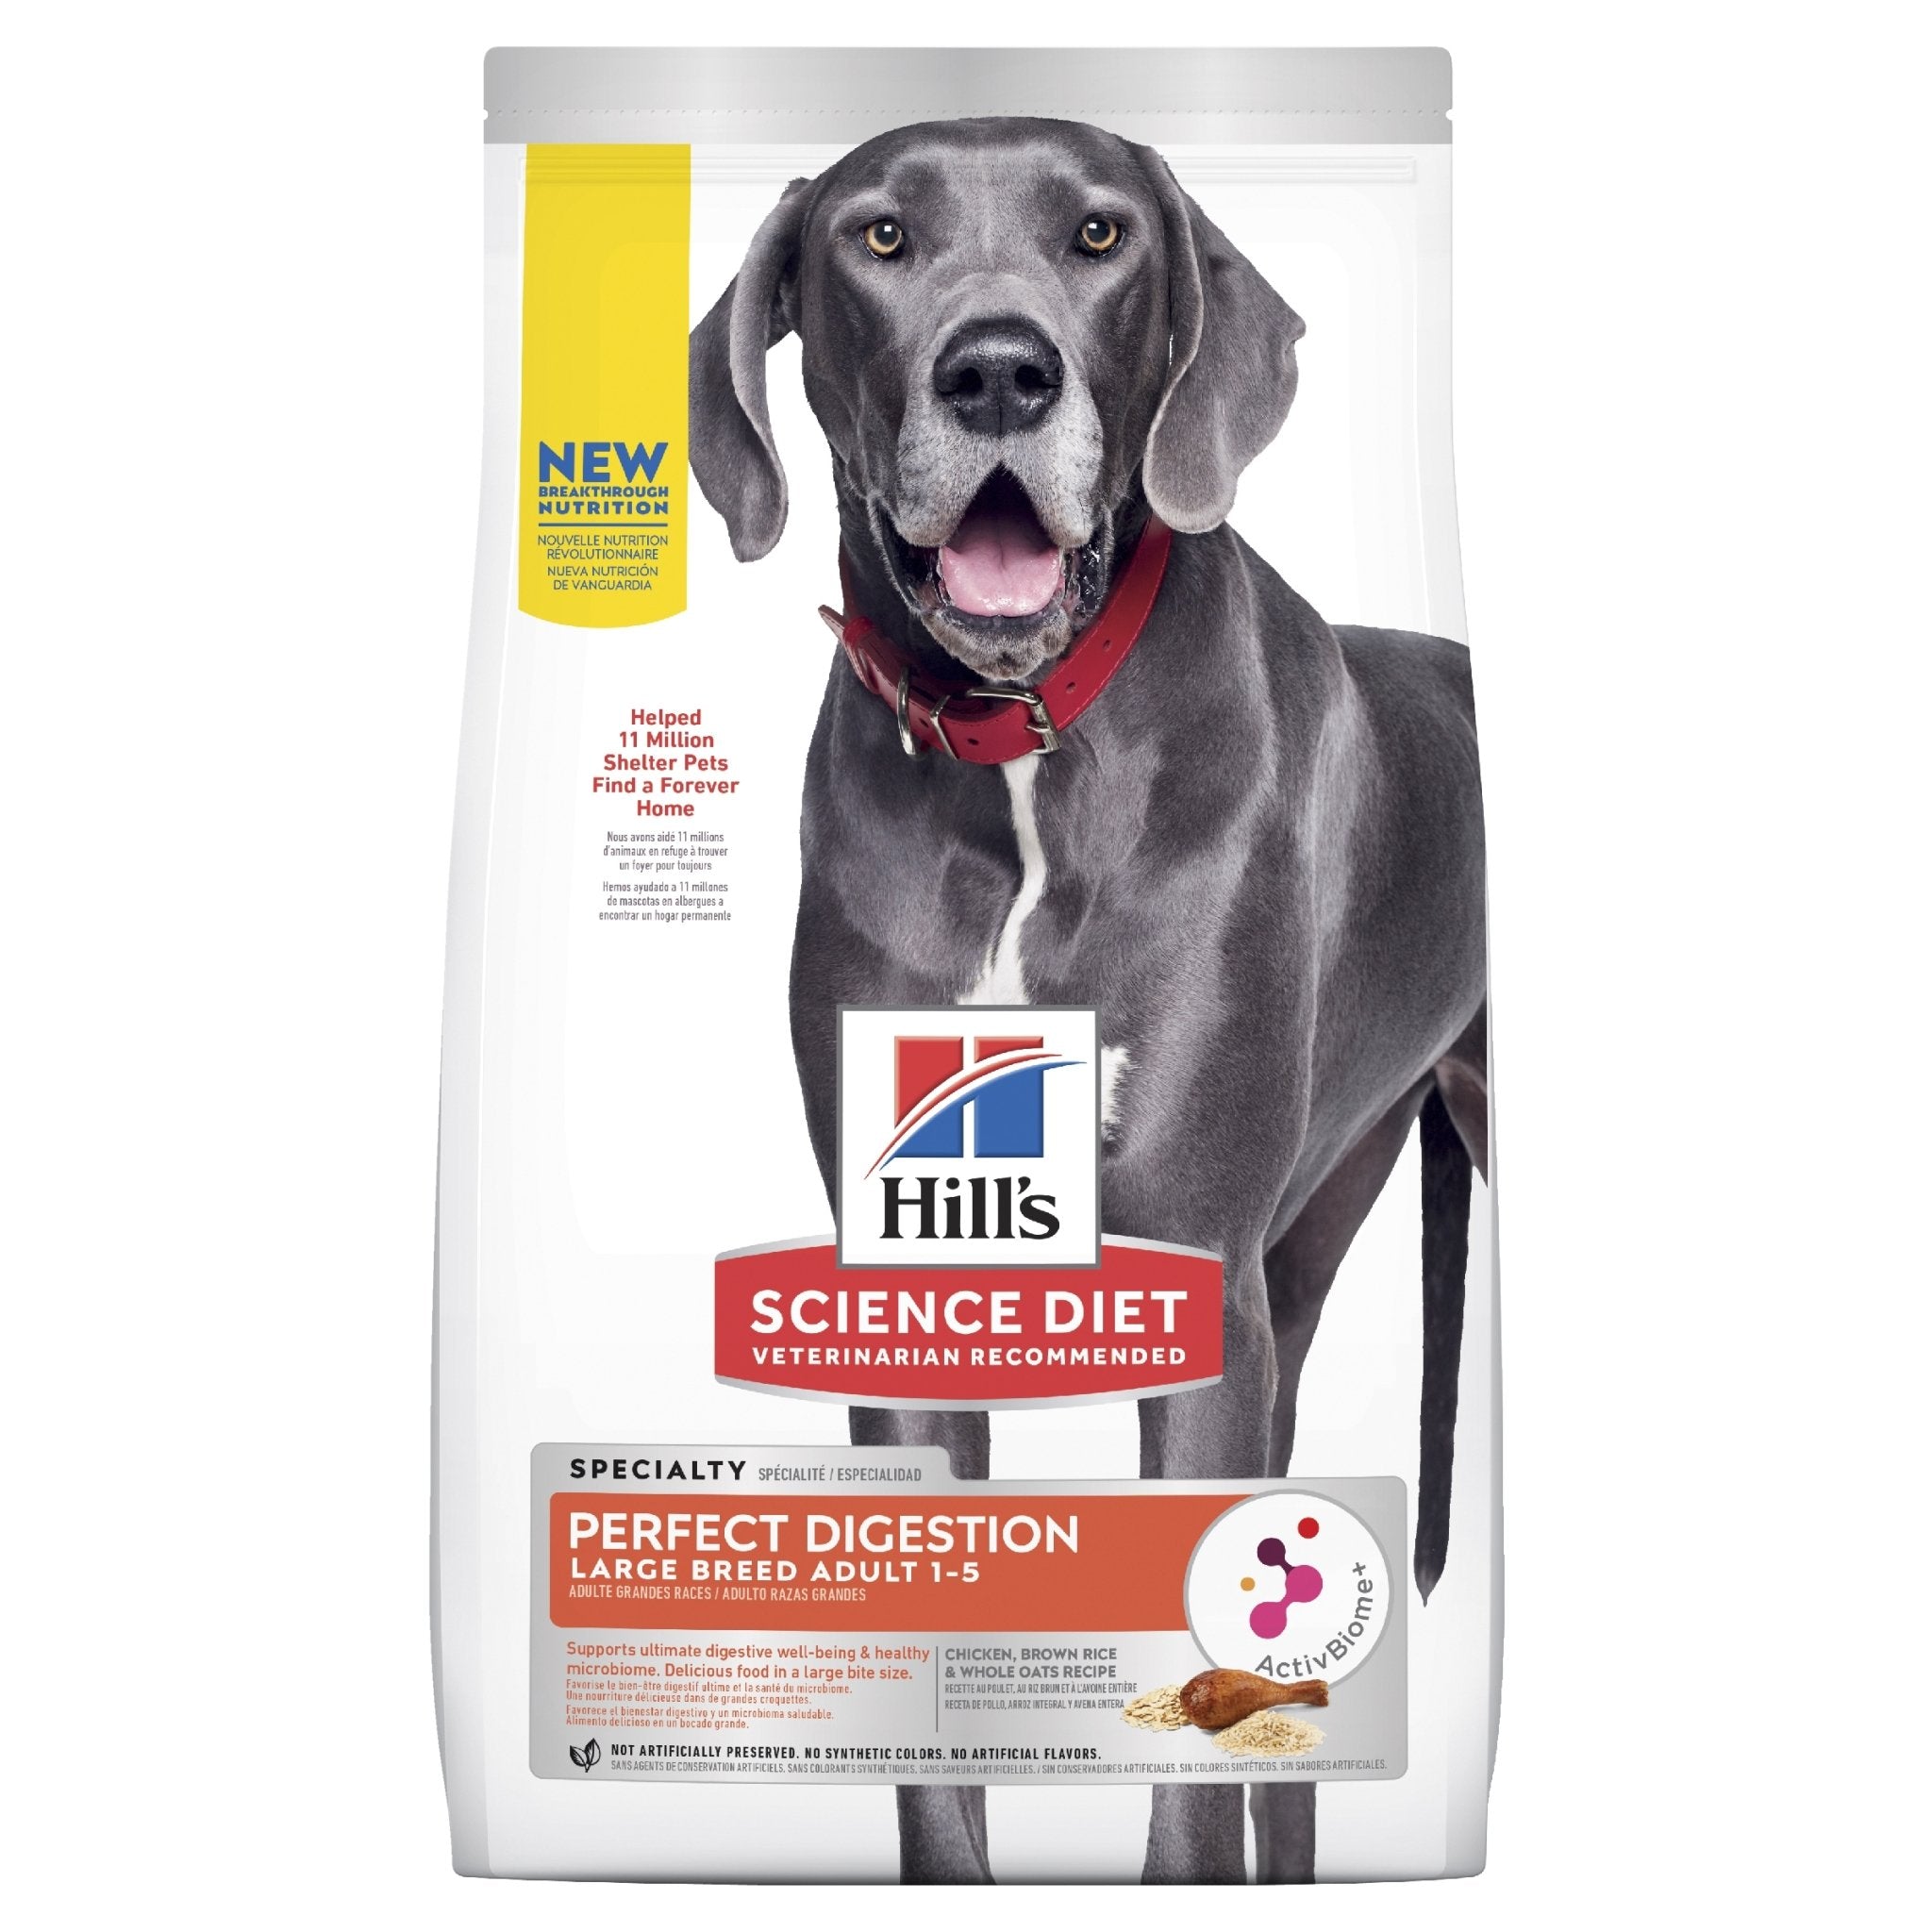 Hill's Science Diet Perfect Digestion Adult Large Breed Dry Dog Food